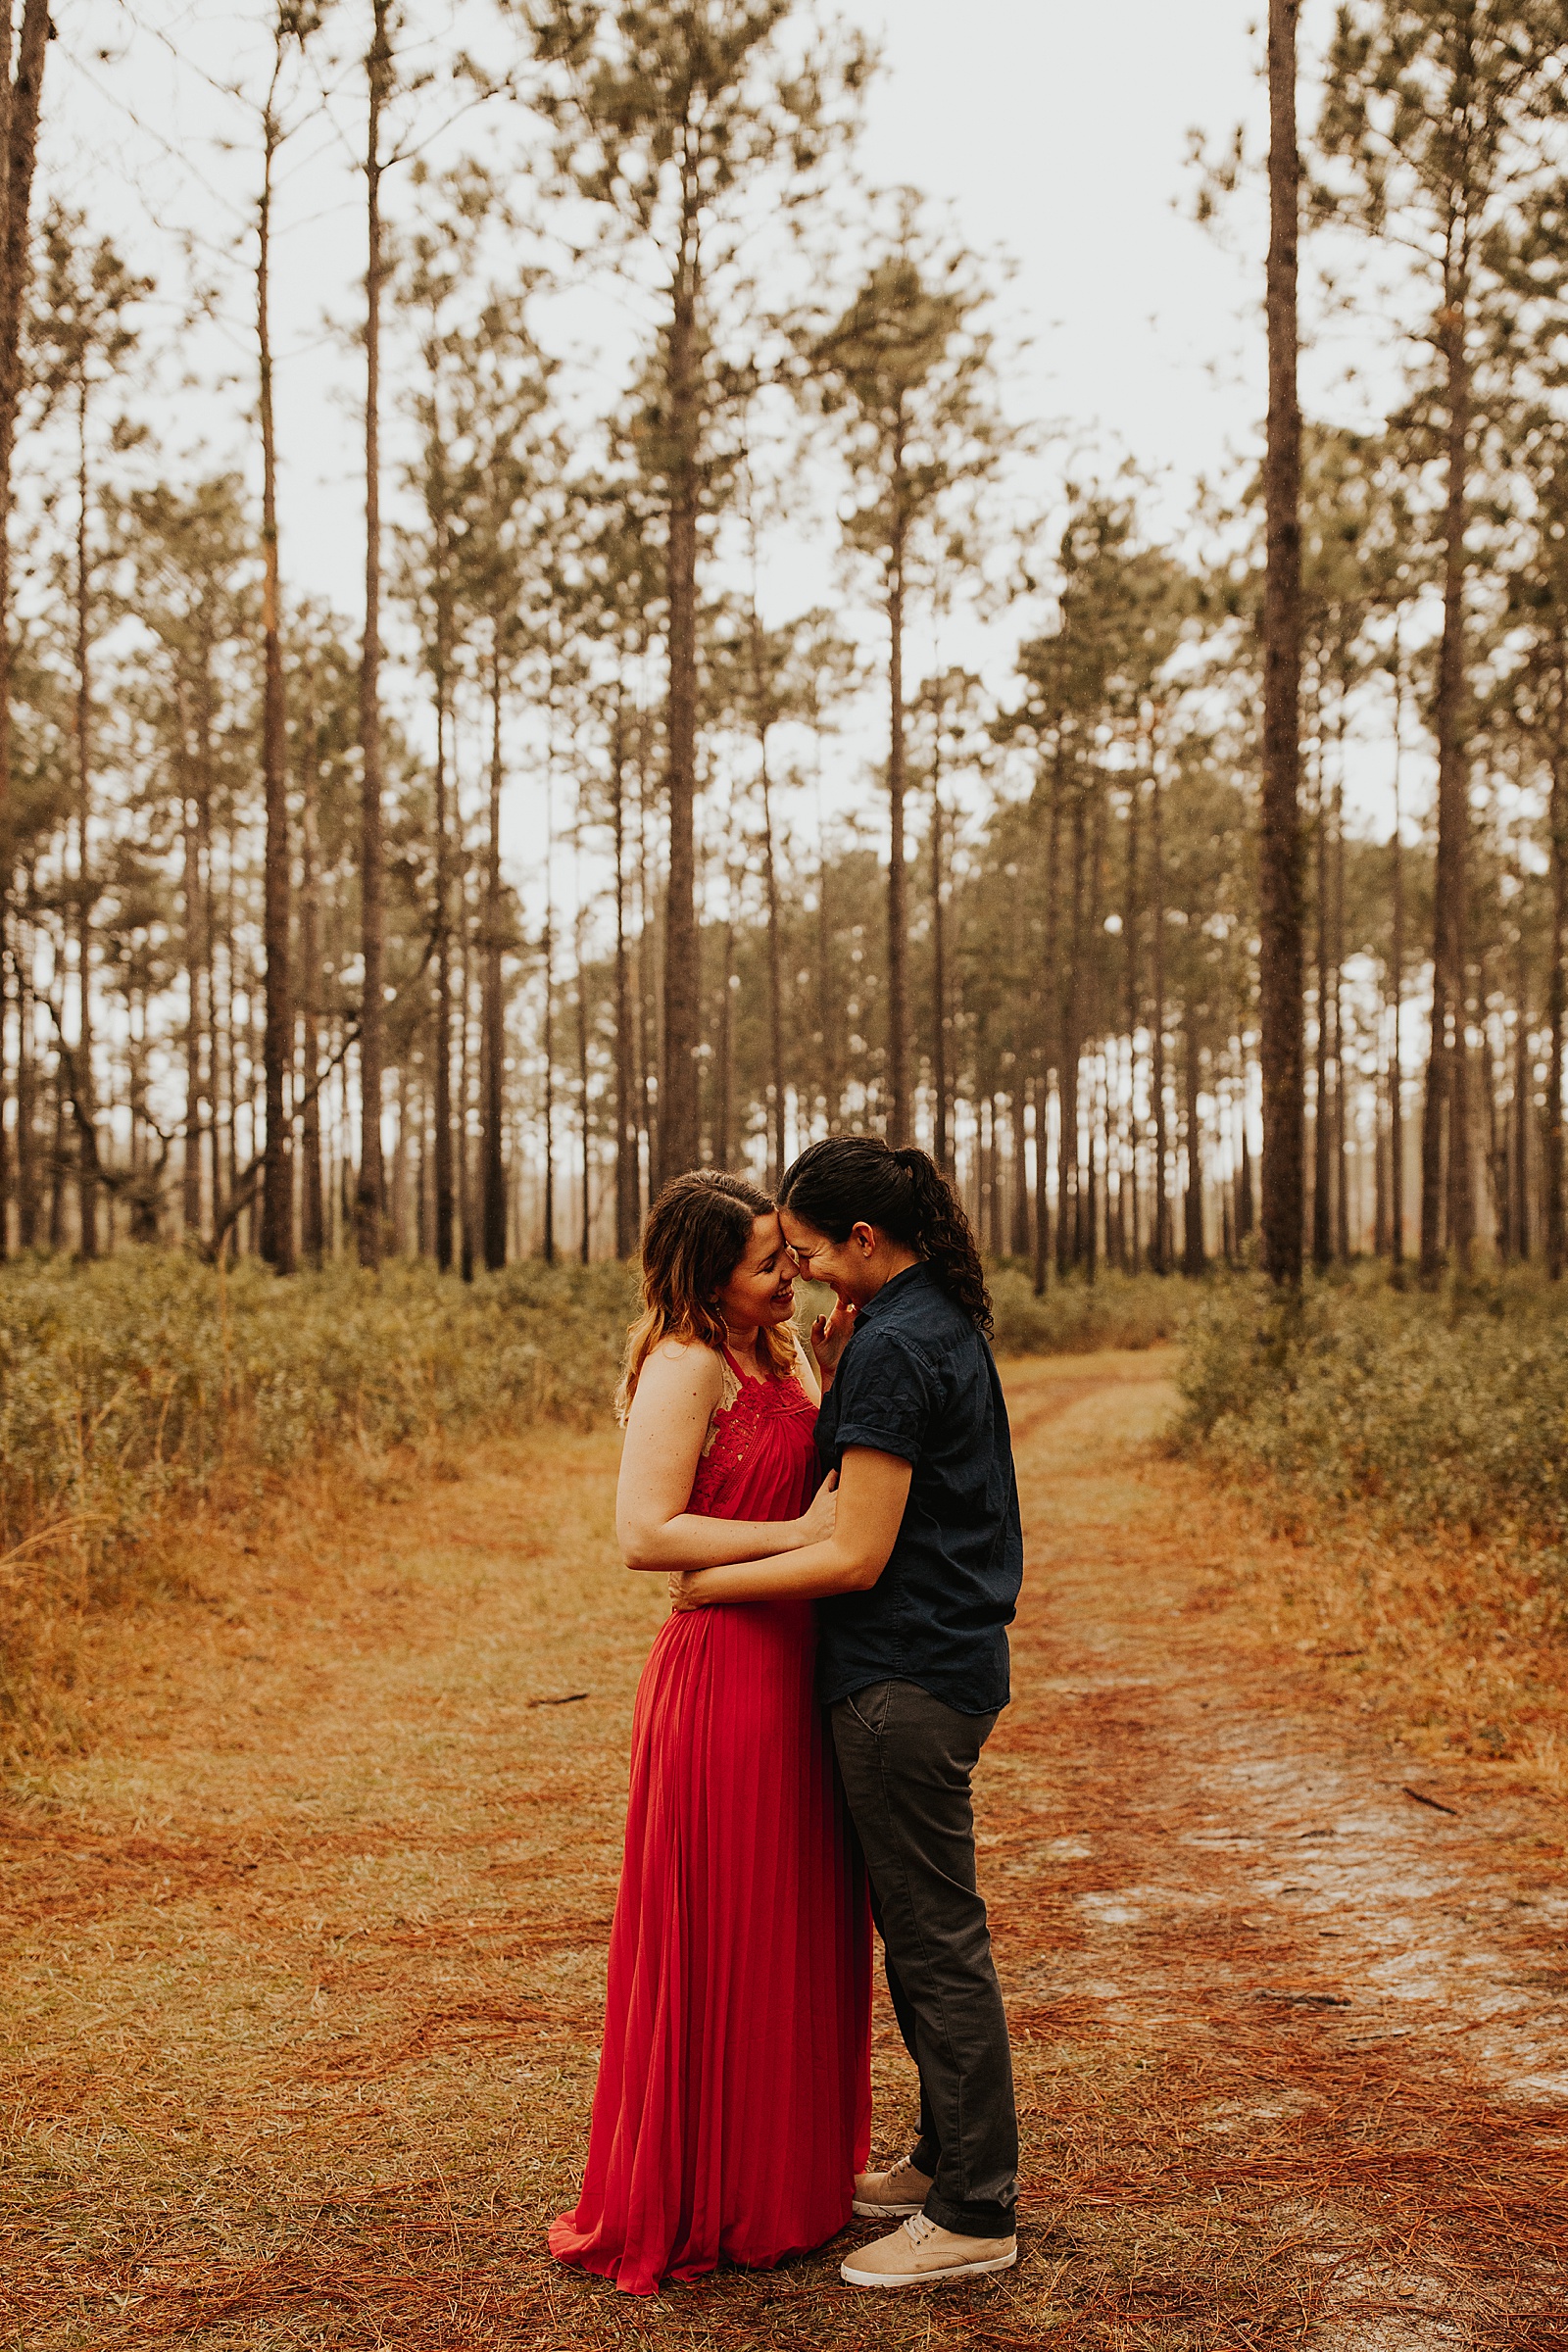 These Jacksonville couple photos were so beautiful in the pouring rain!